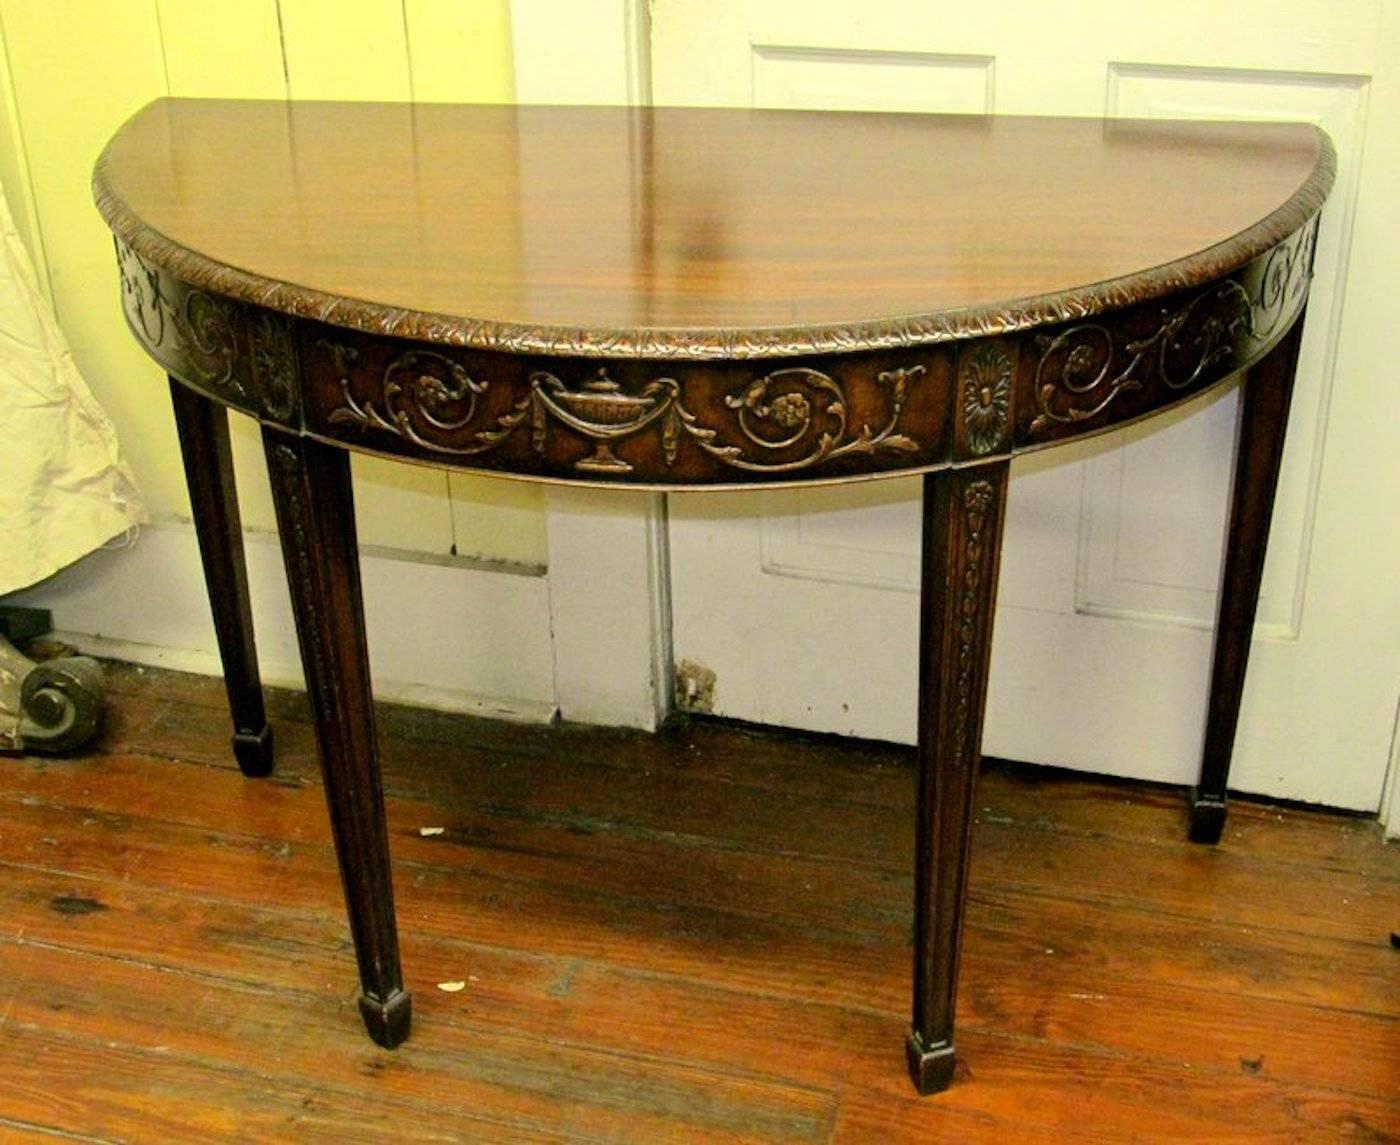 Exceptional quality antique English hand-carved mahogany 